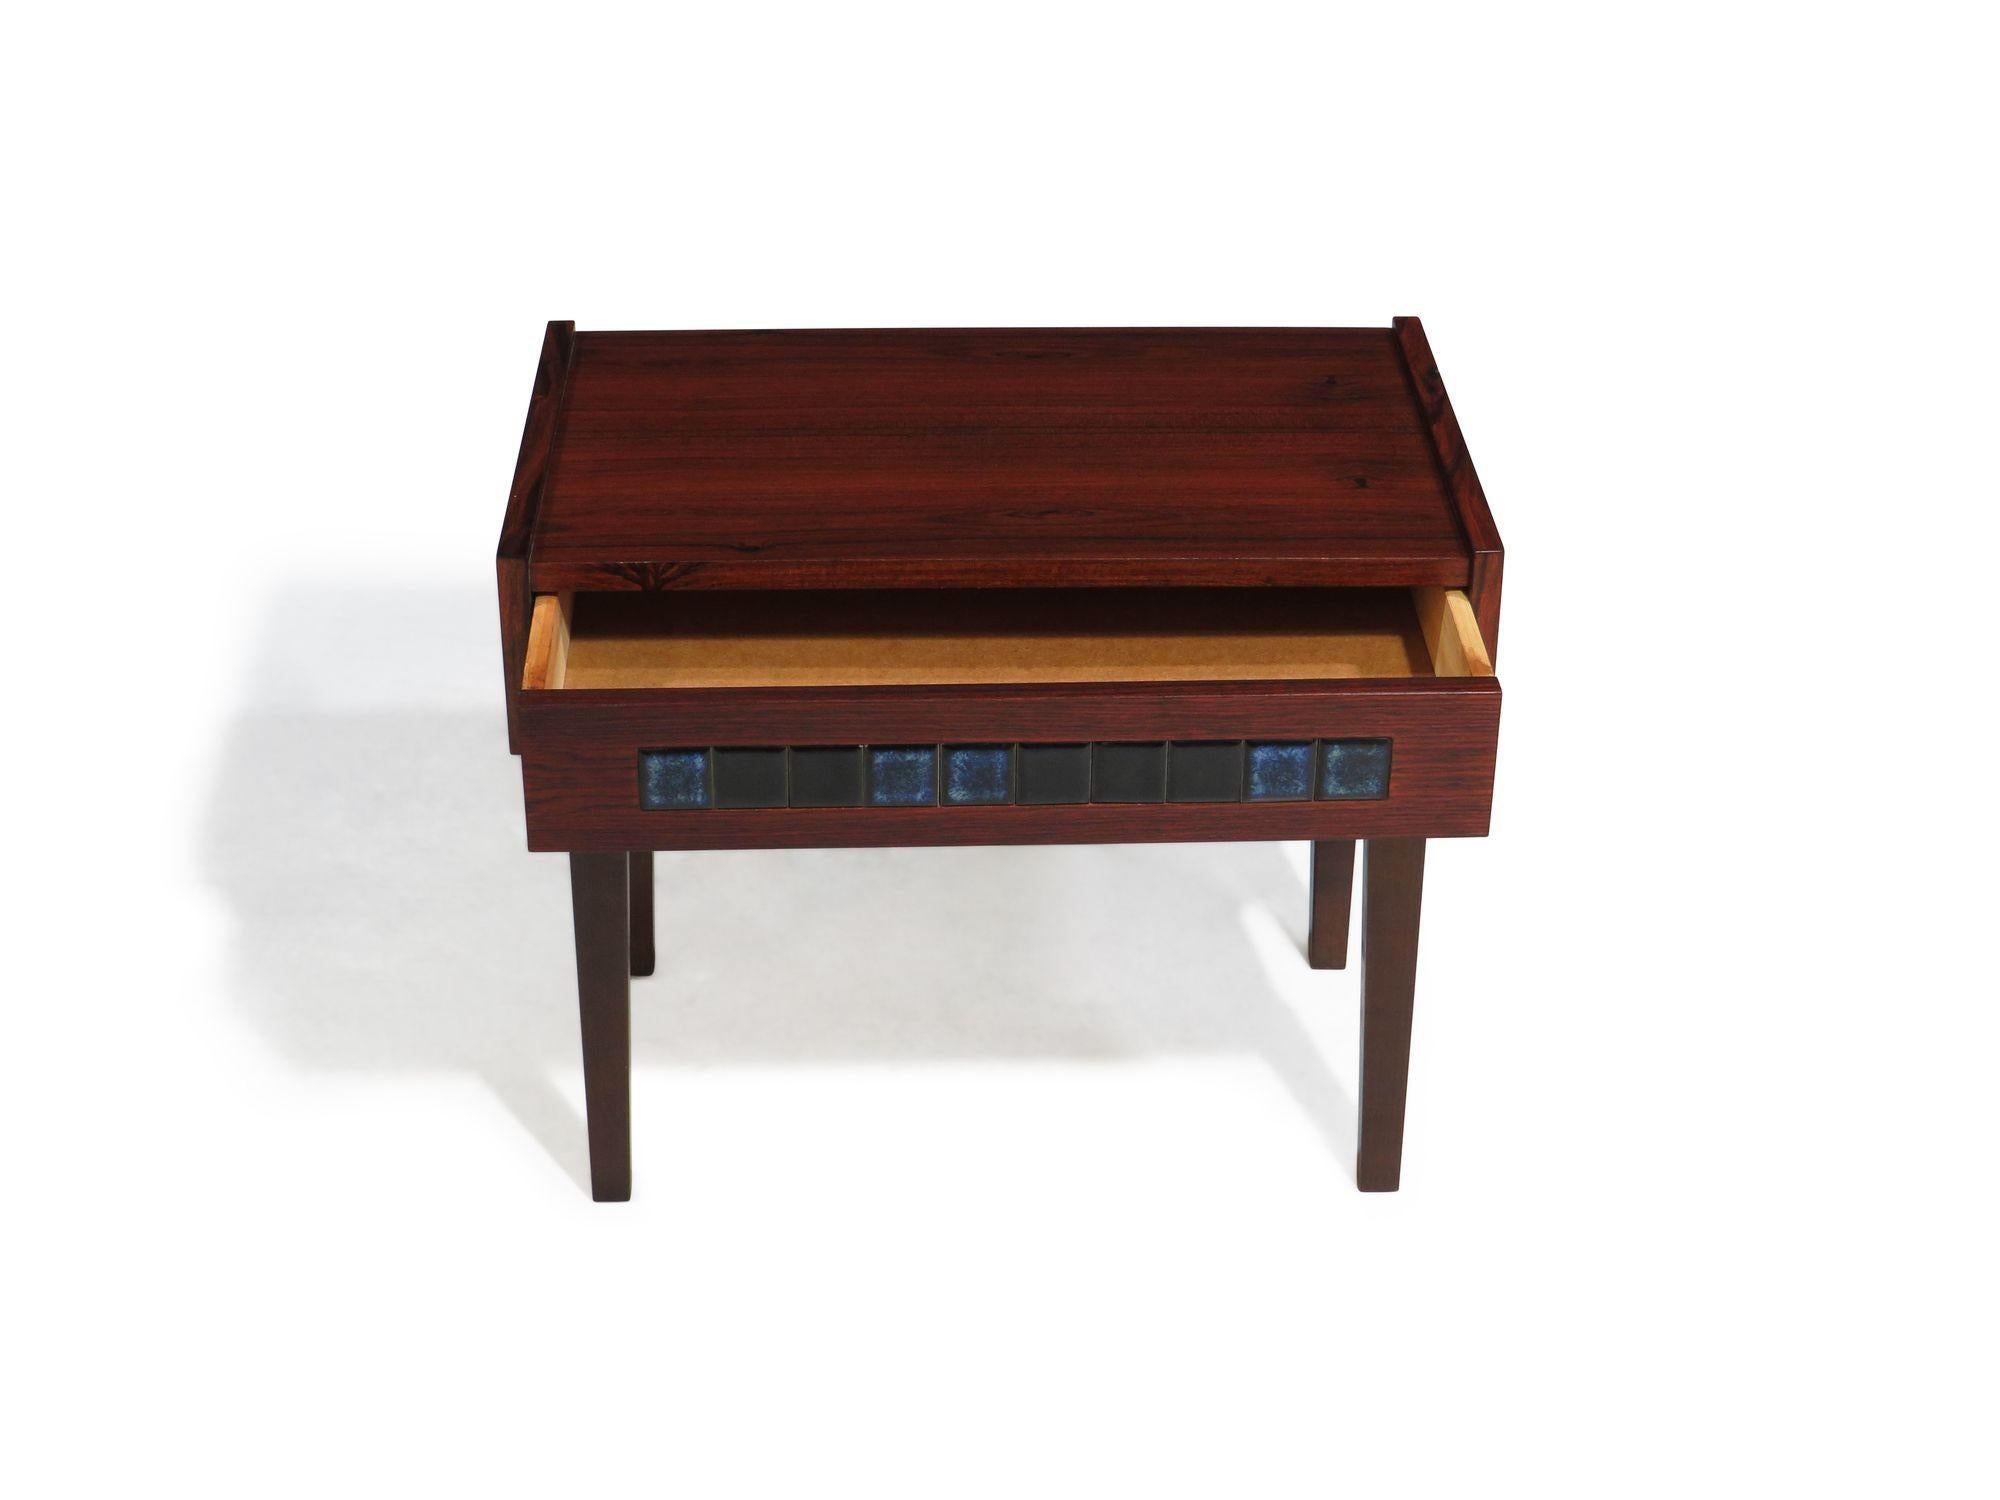 20th Century Danish Rosewood Nightstands with Blue Tiles